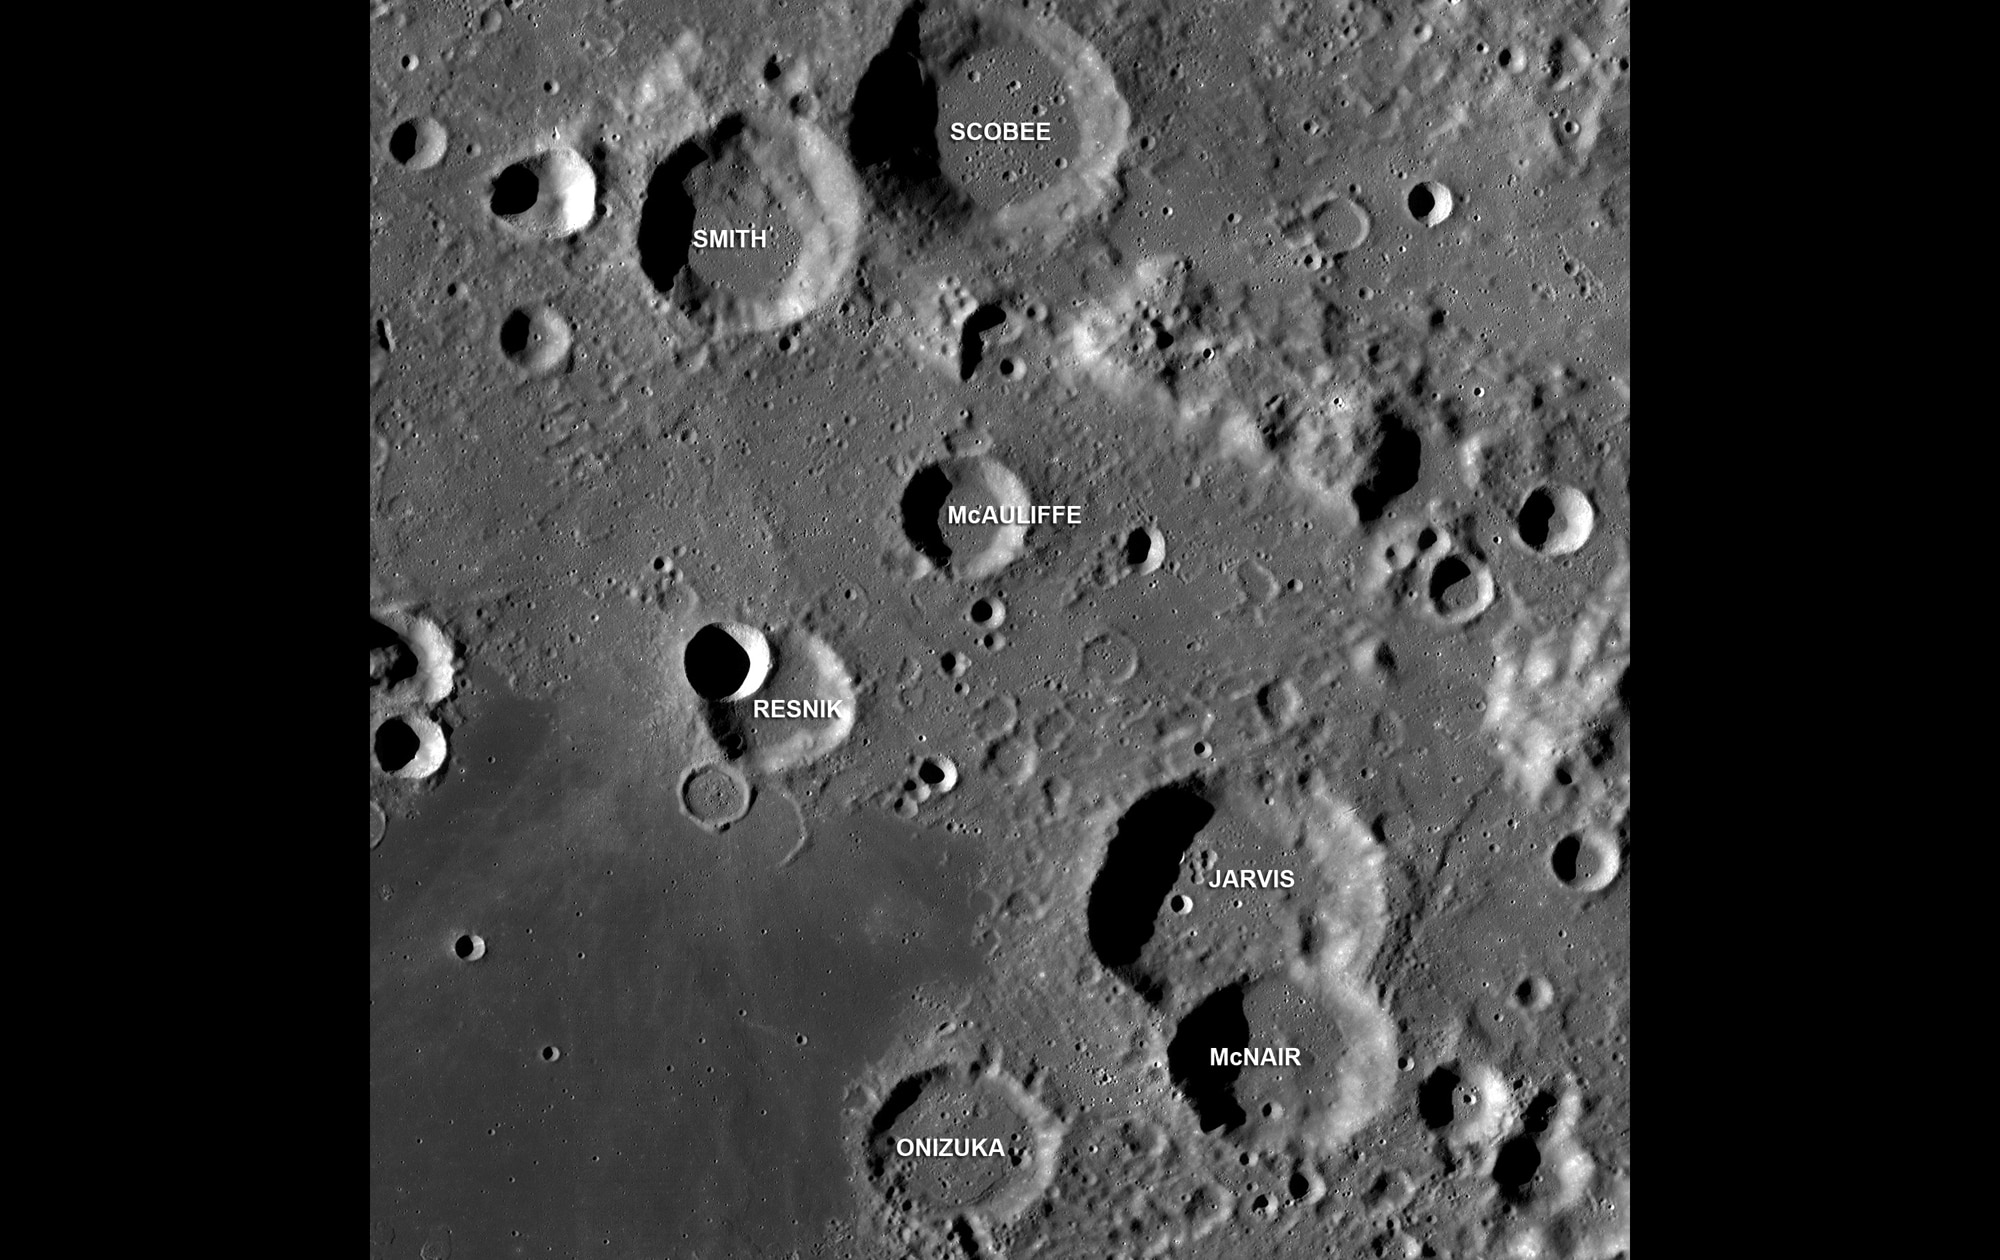 Craters on the Moon named after the Challenger astronauts. Credit: NASA/GSFC/Arizona State University